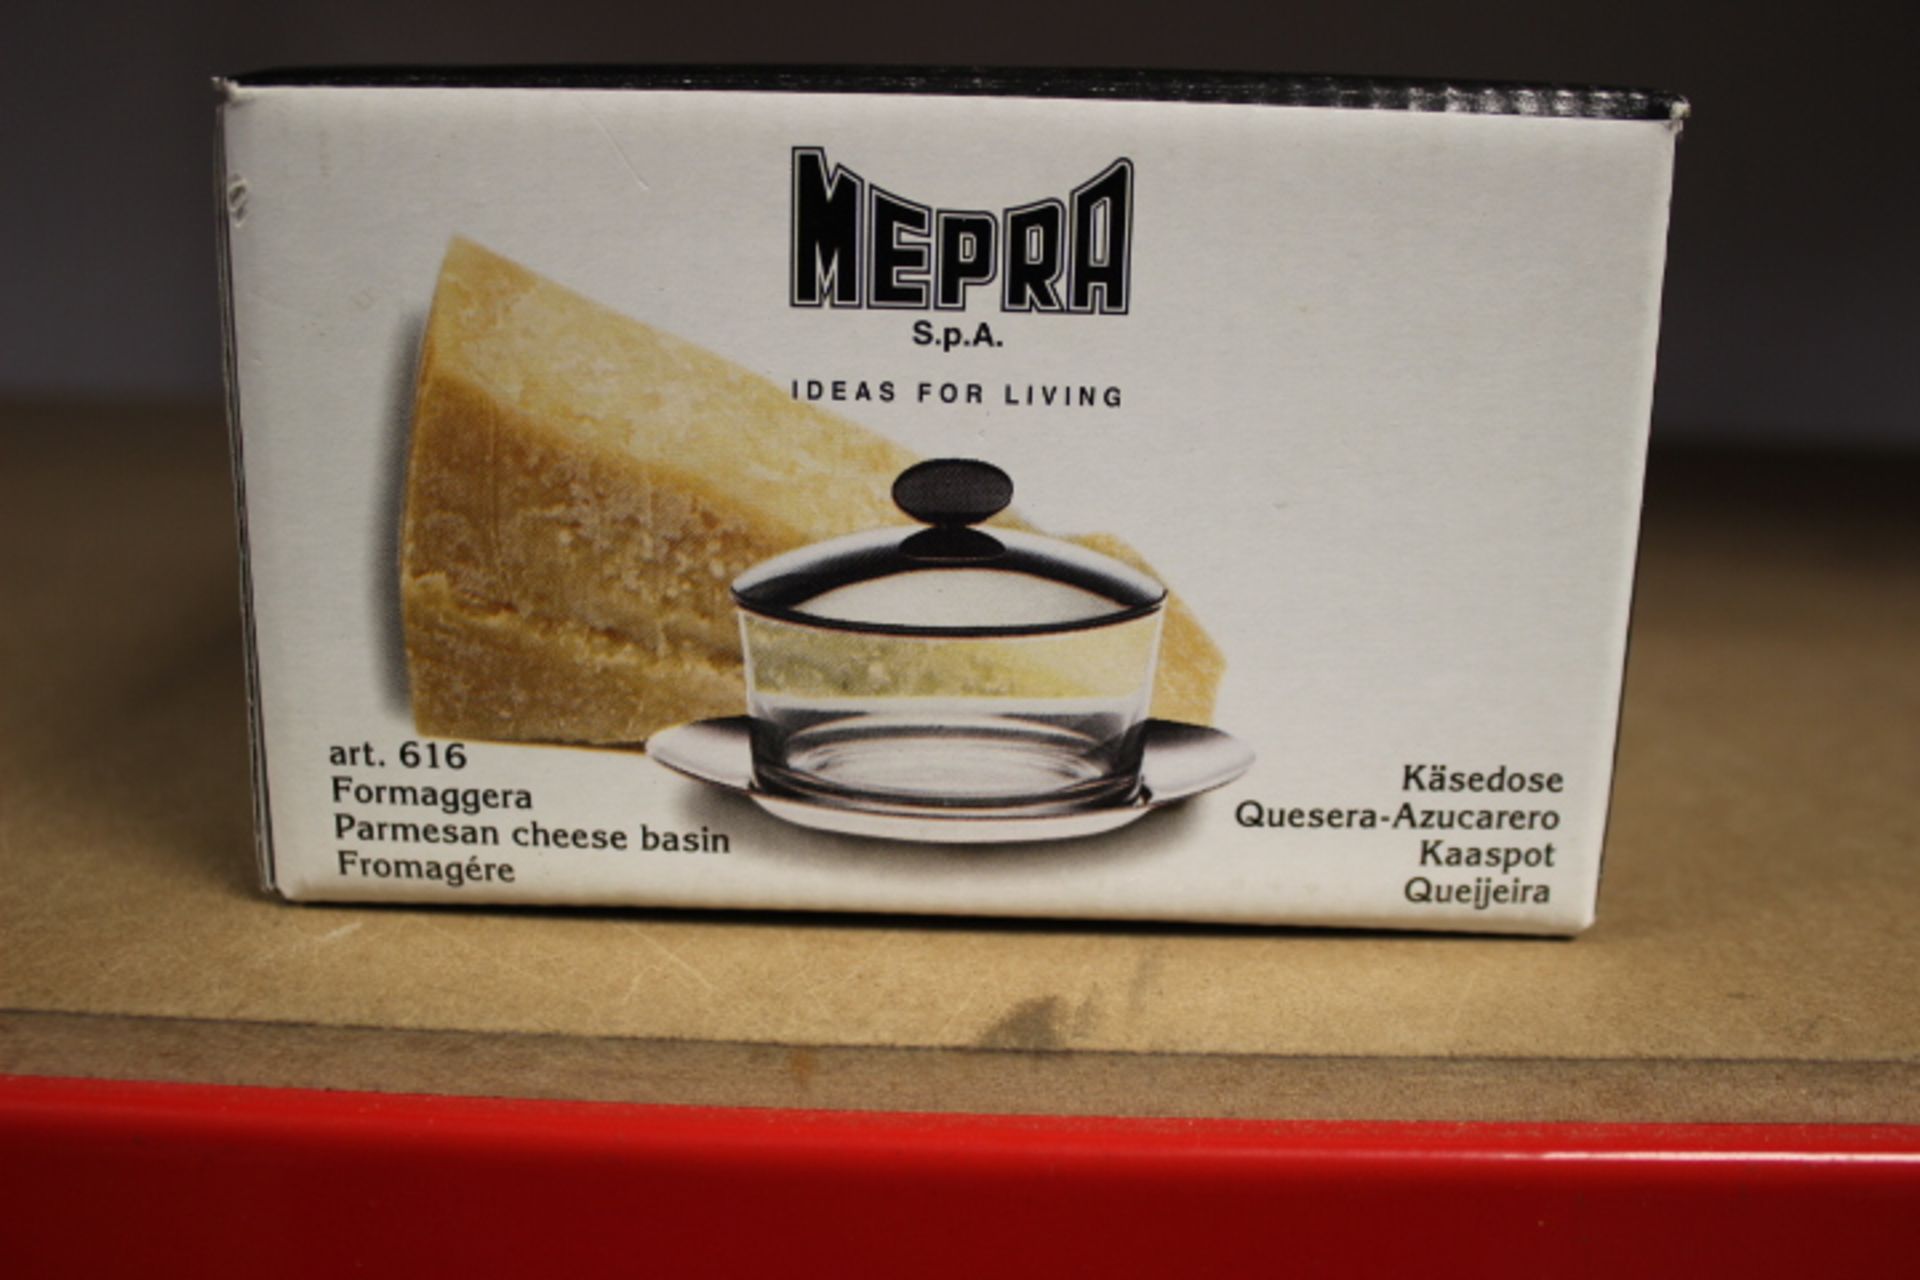 Mepra Stainless Steel Due Ice Parmesan Cheese BasinSilver